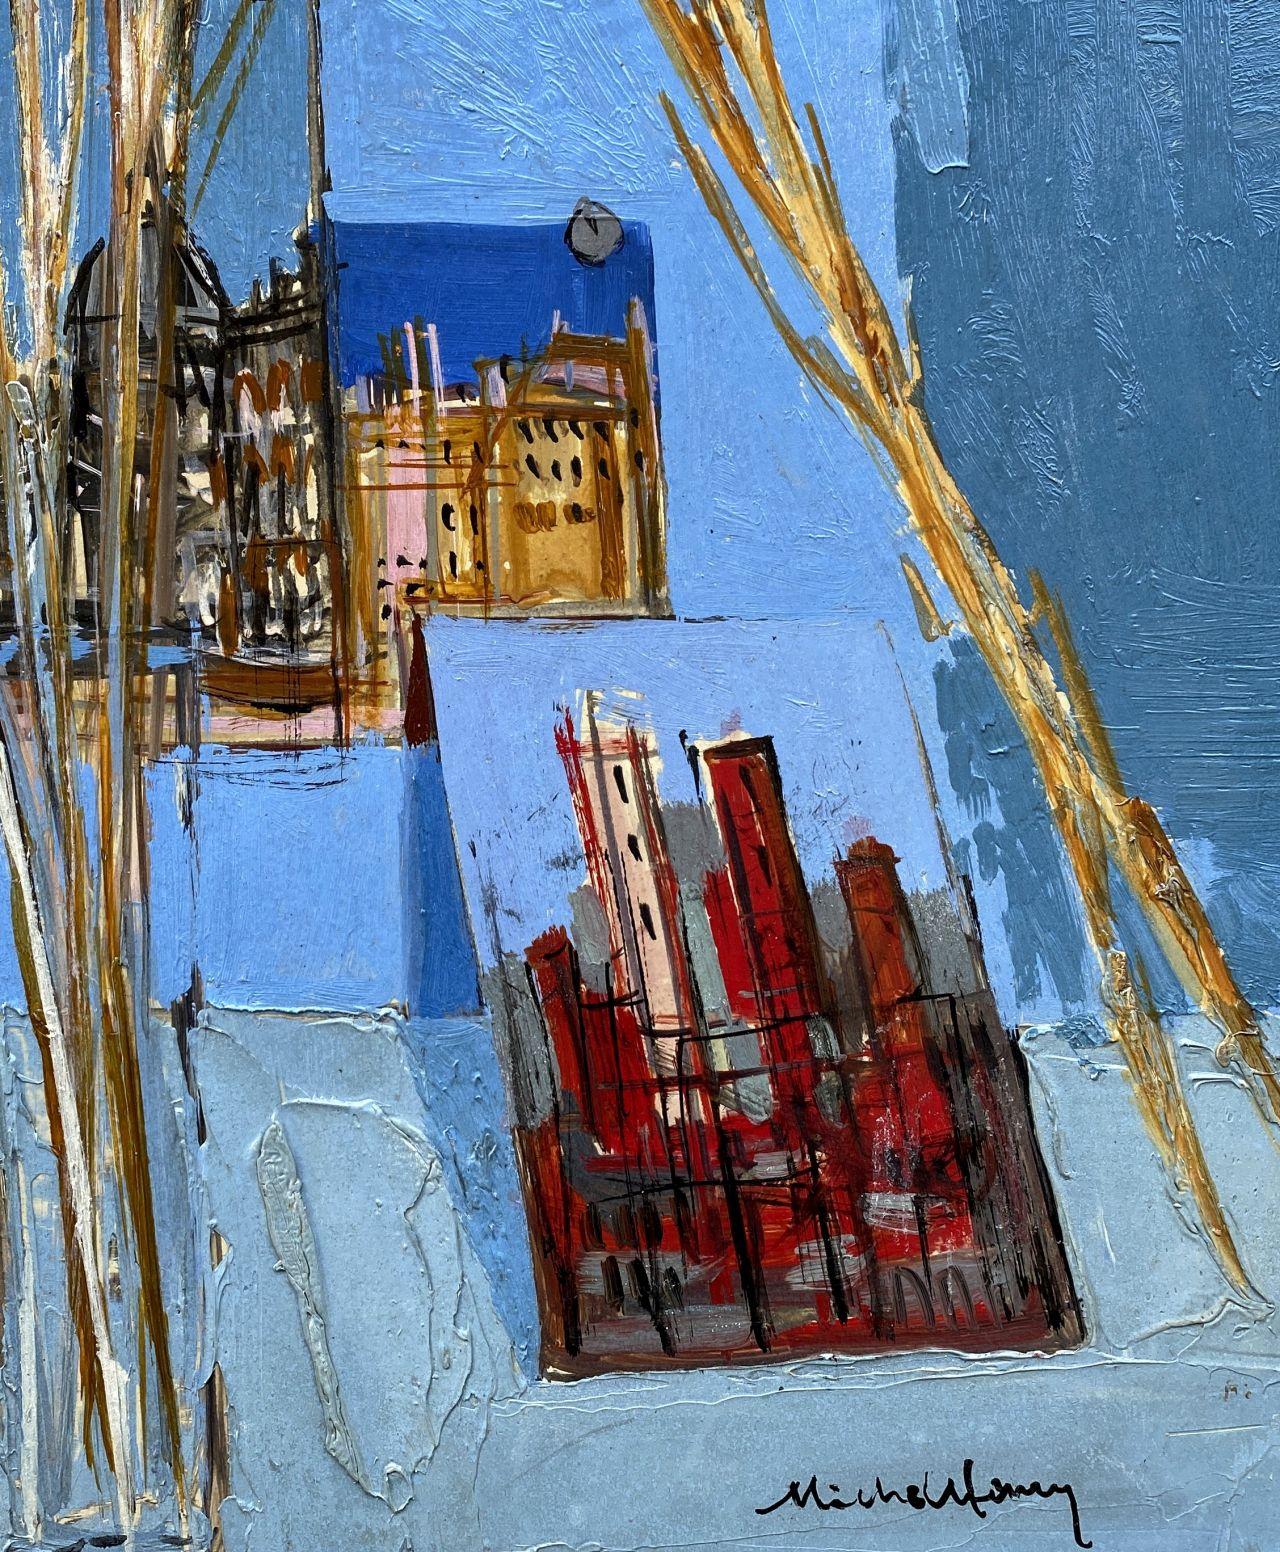 Memories of Italy : Rome - Oil on Panel Handsigned - Blue Landscape Print by Michel Henry